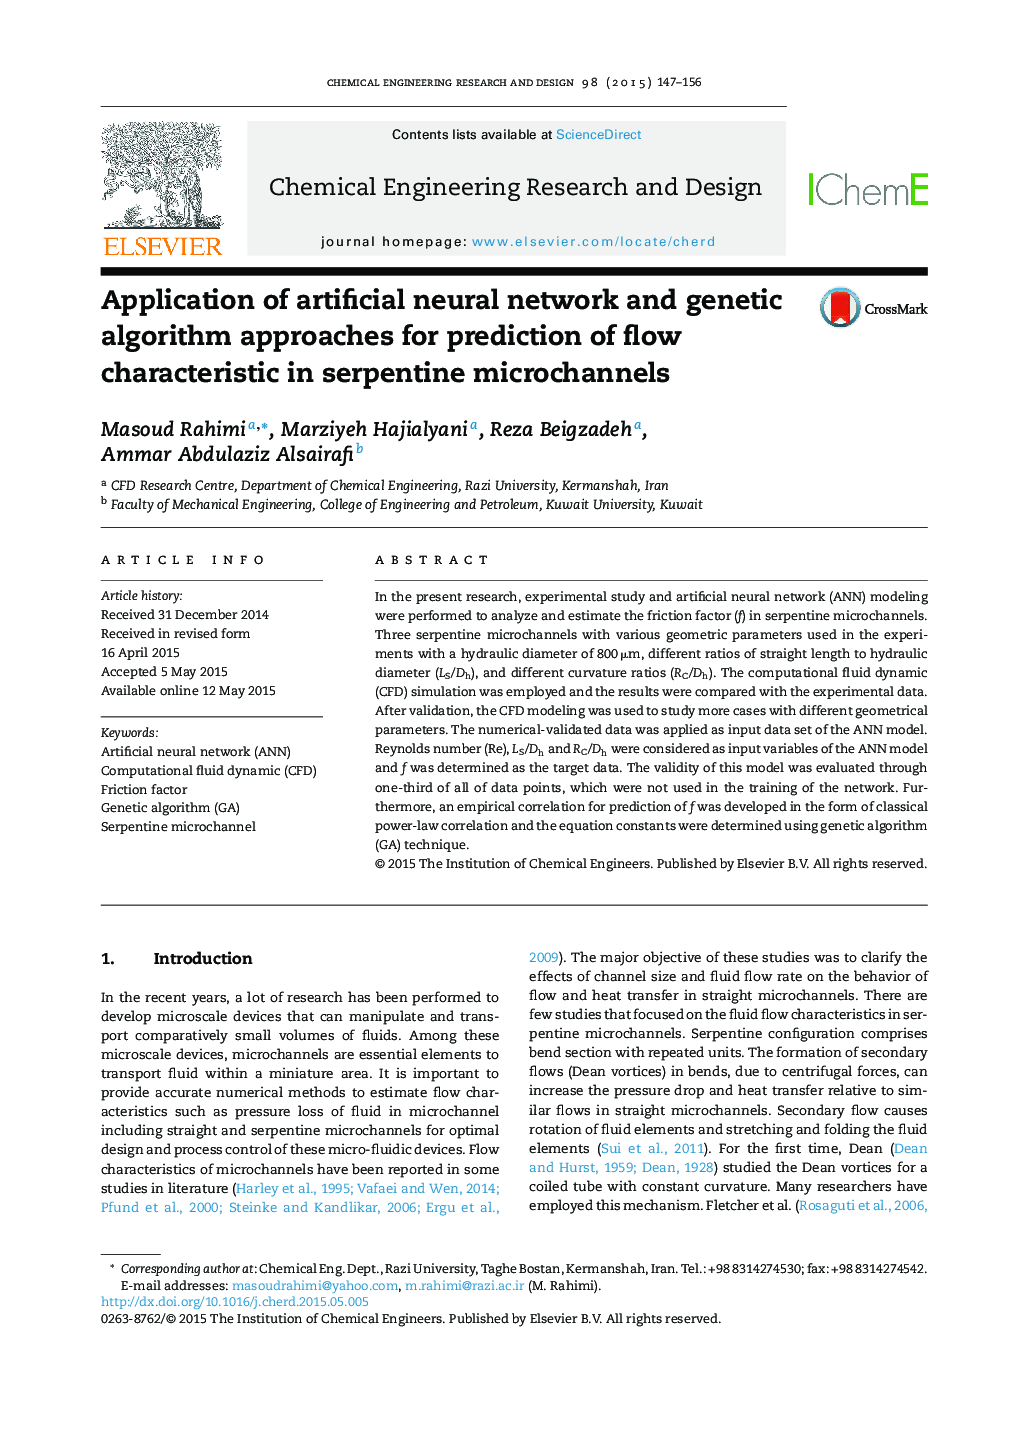 Application of artificial neural network and genetic algorithm approaches for prediction of flow characteristic in serpentine microchannels